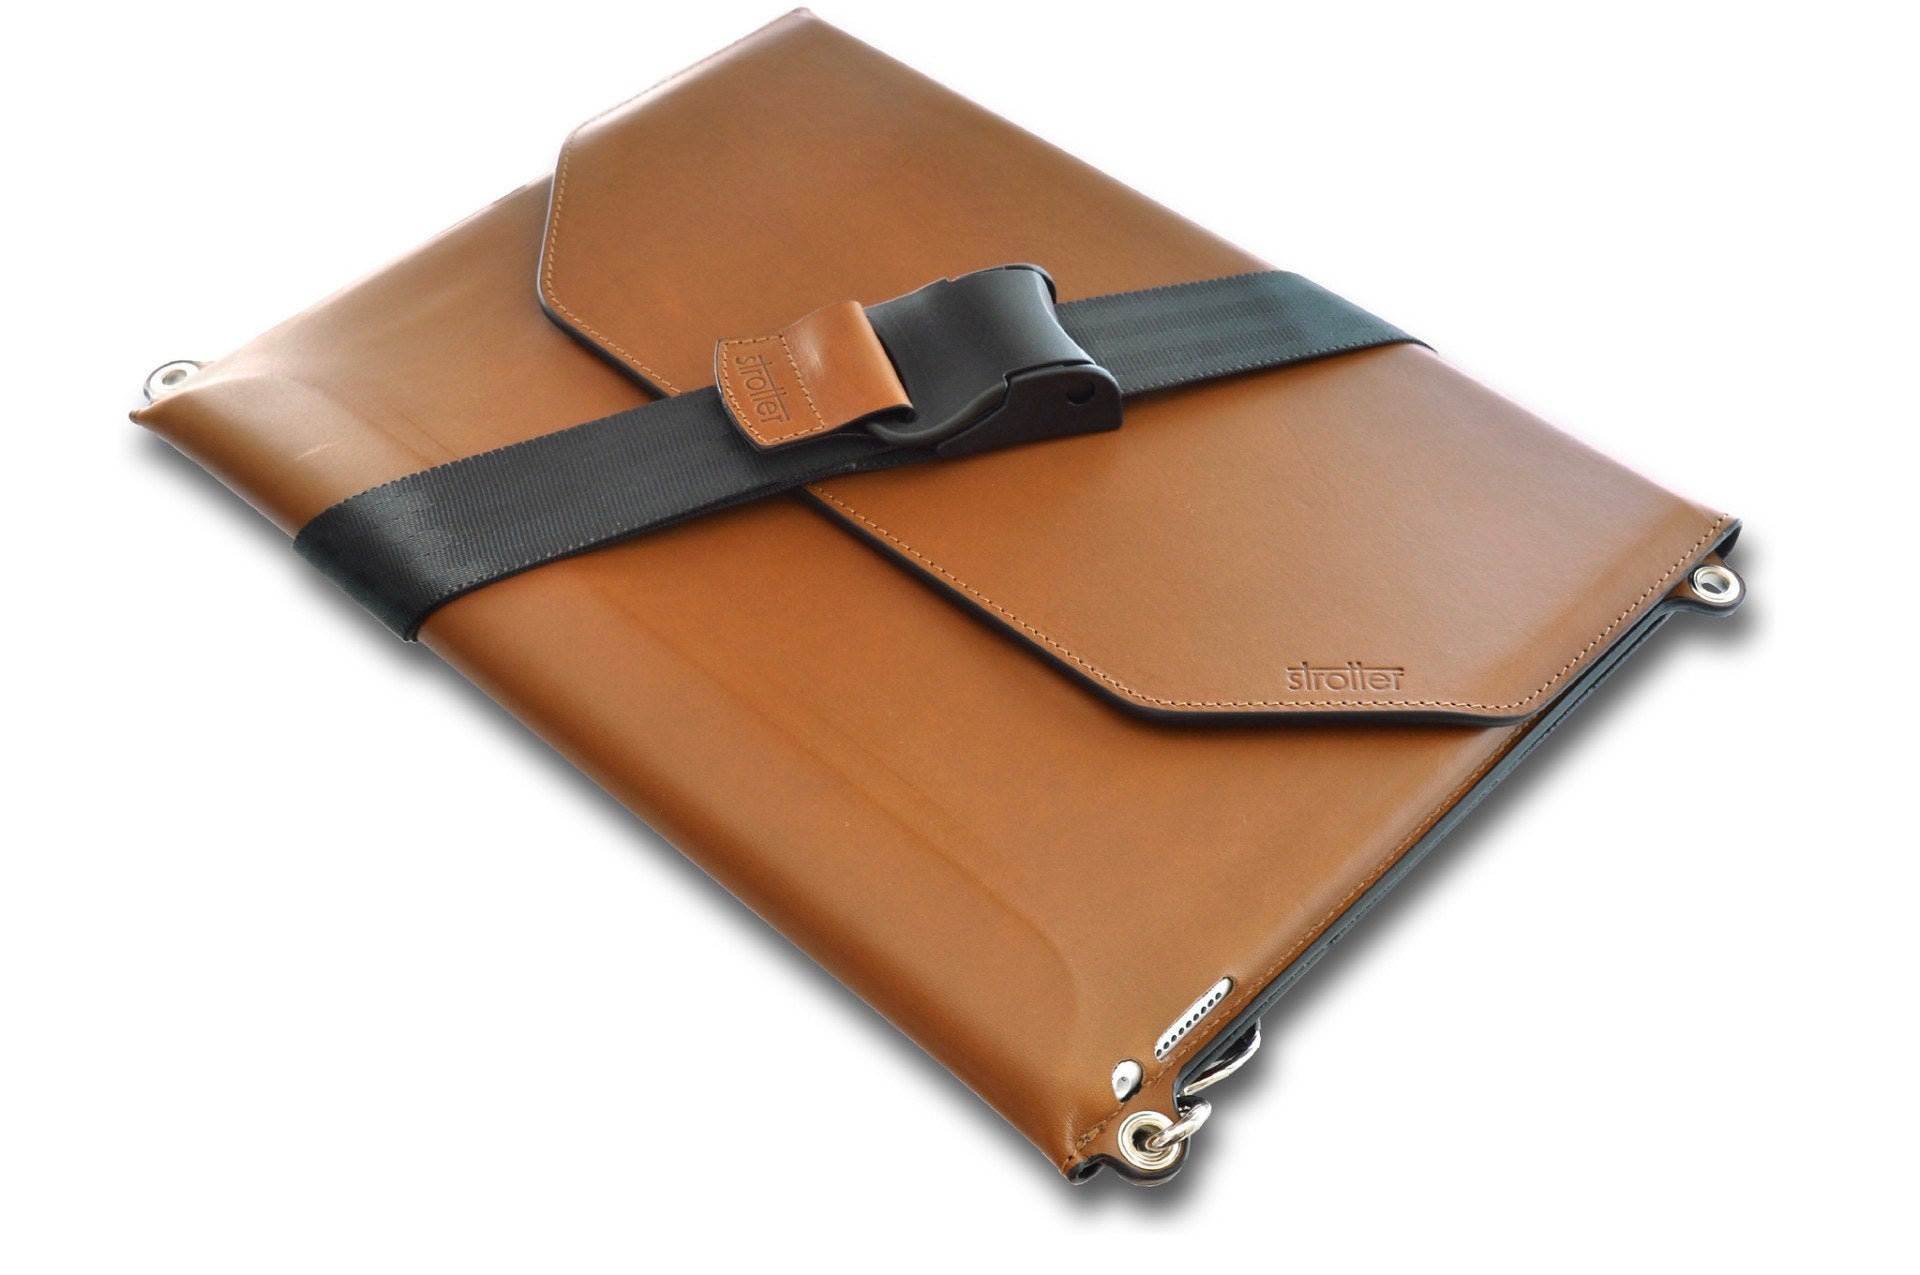 iPad Pro 12.9 2015-2017 Carrying Case with Strap - Across by Strotter. 